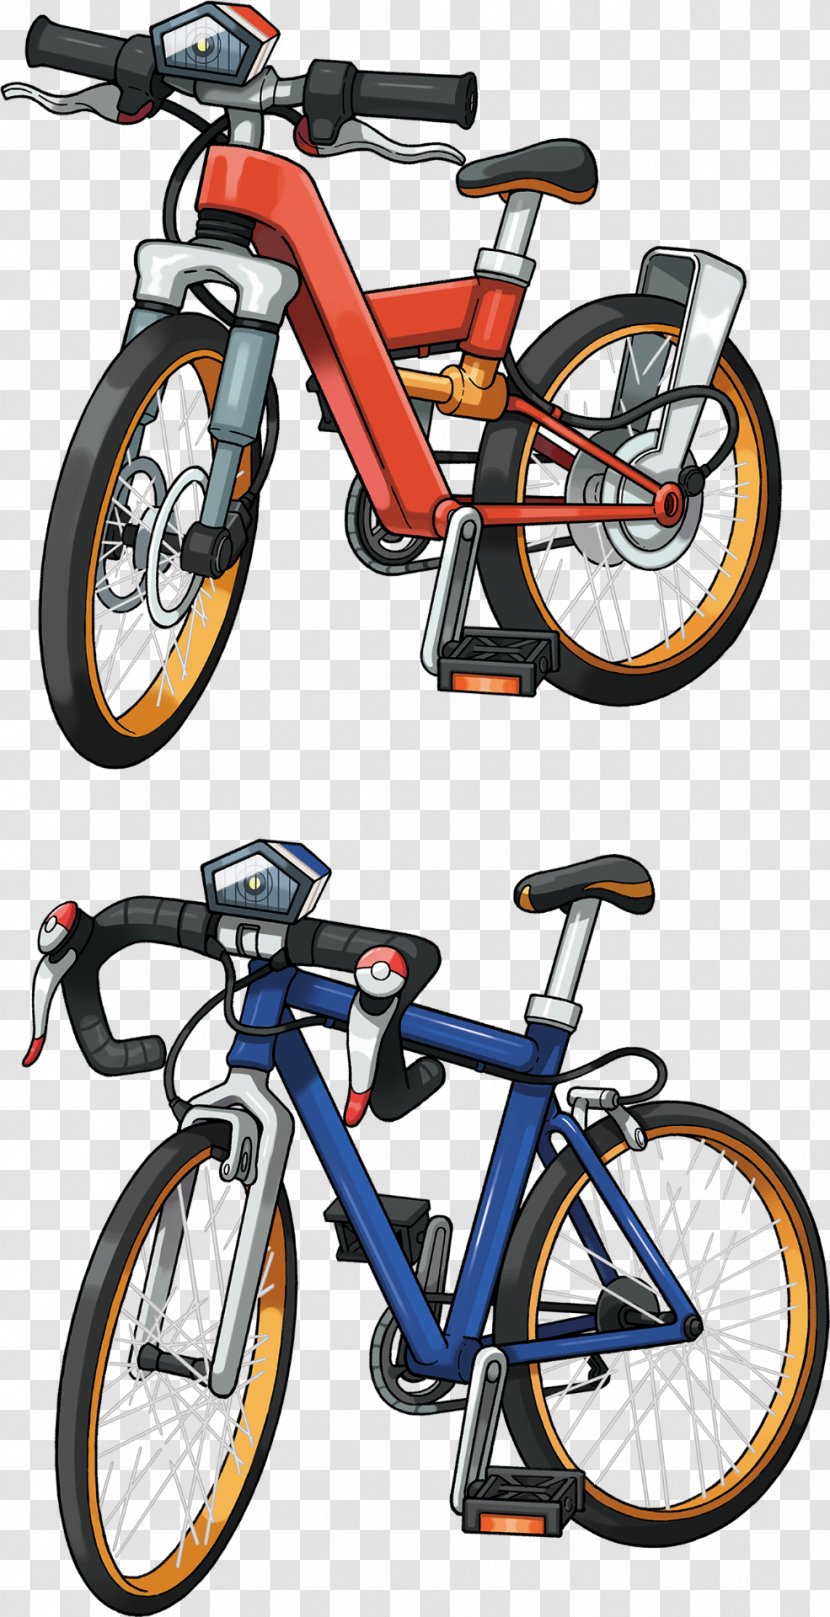 Pokémon Omega Ruby And Alpha Sapphire Bicycle Trading Card Game - Wheel Transparent PNG